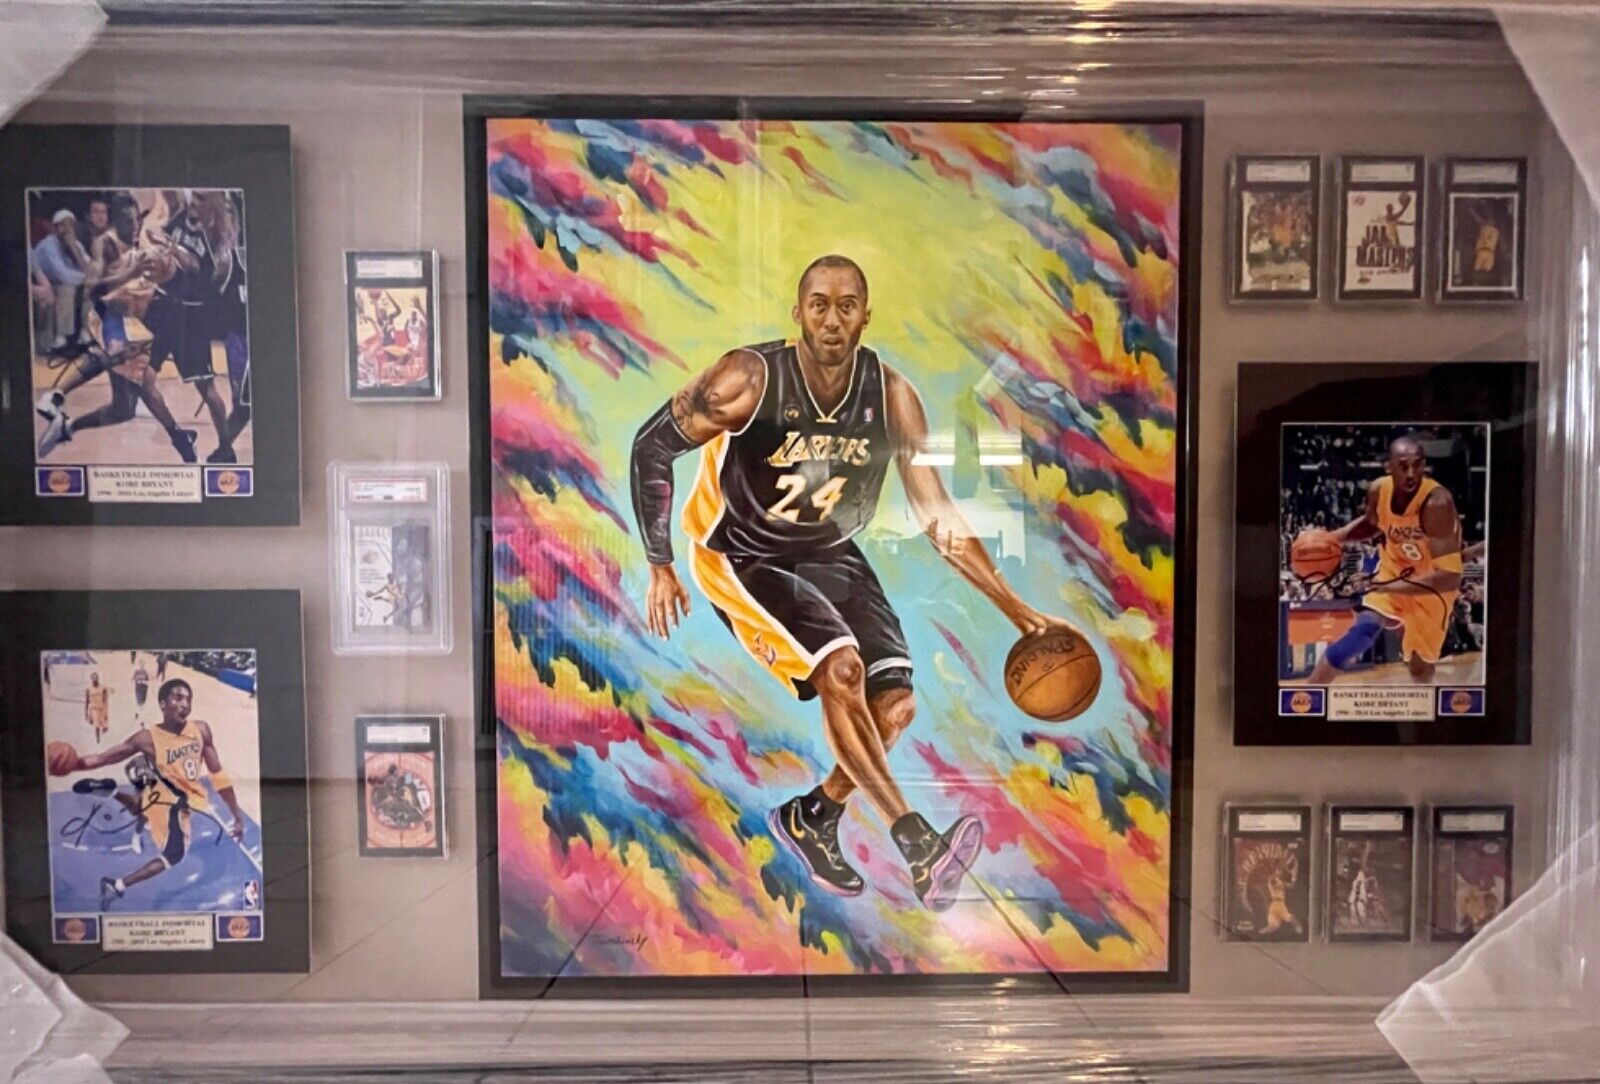 Black Mamba Kobe Bryant  signed/graded collection items including a painting